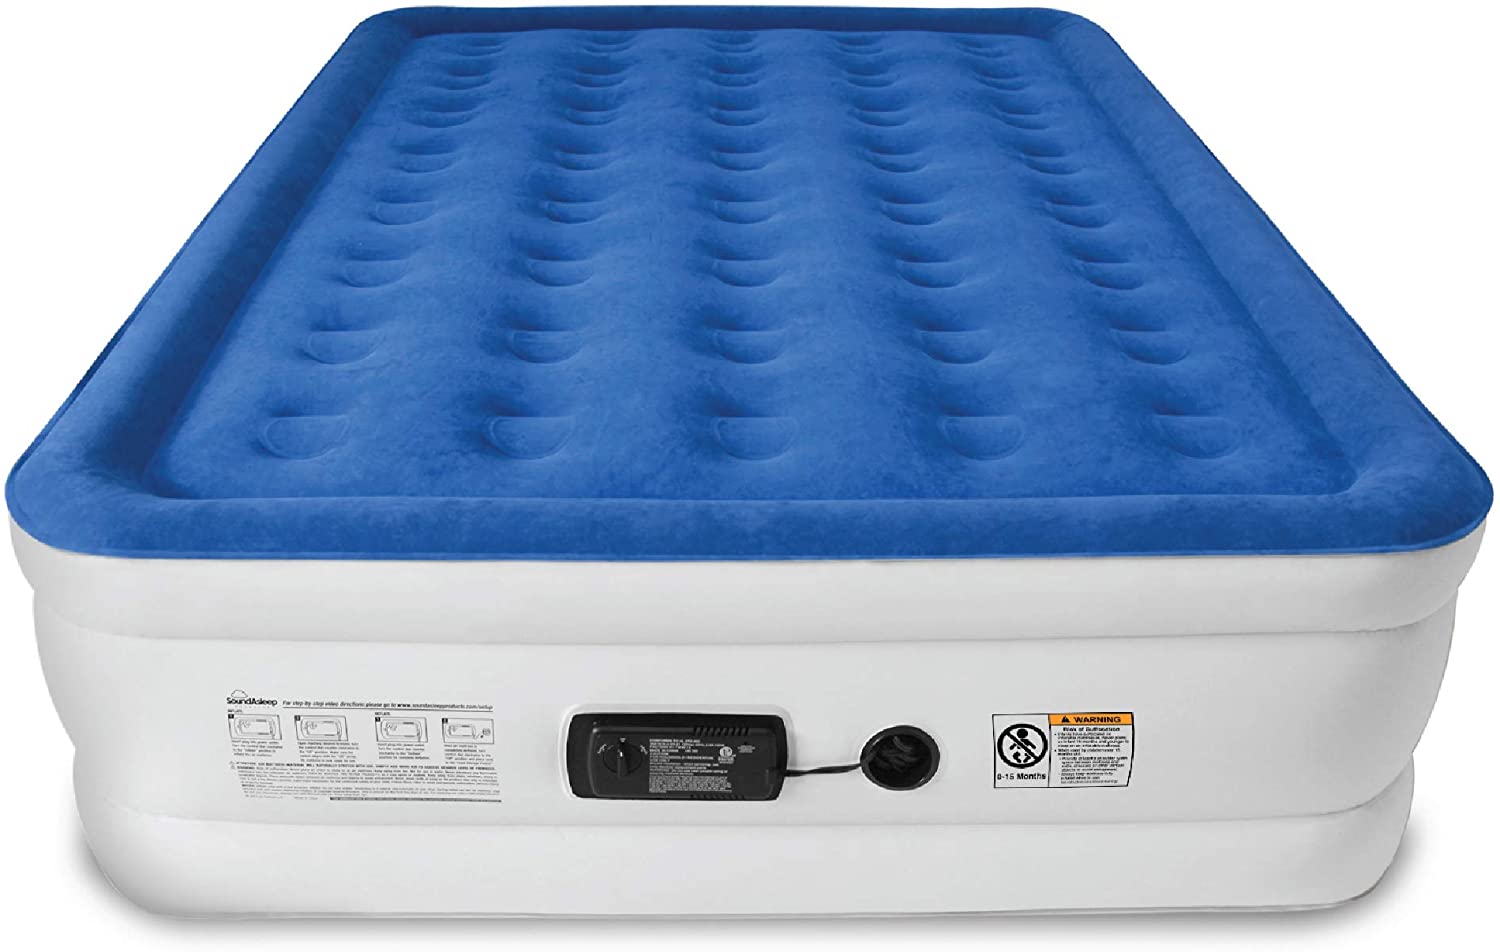 Air Mattress for guests